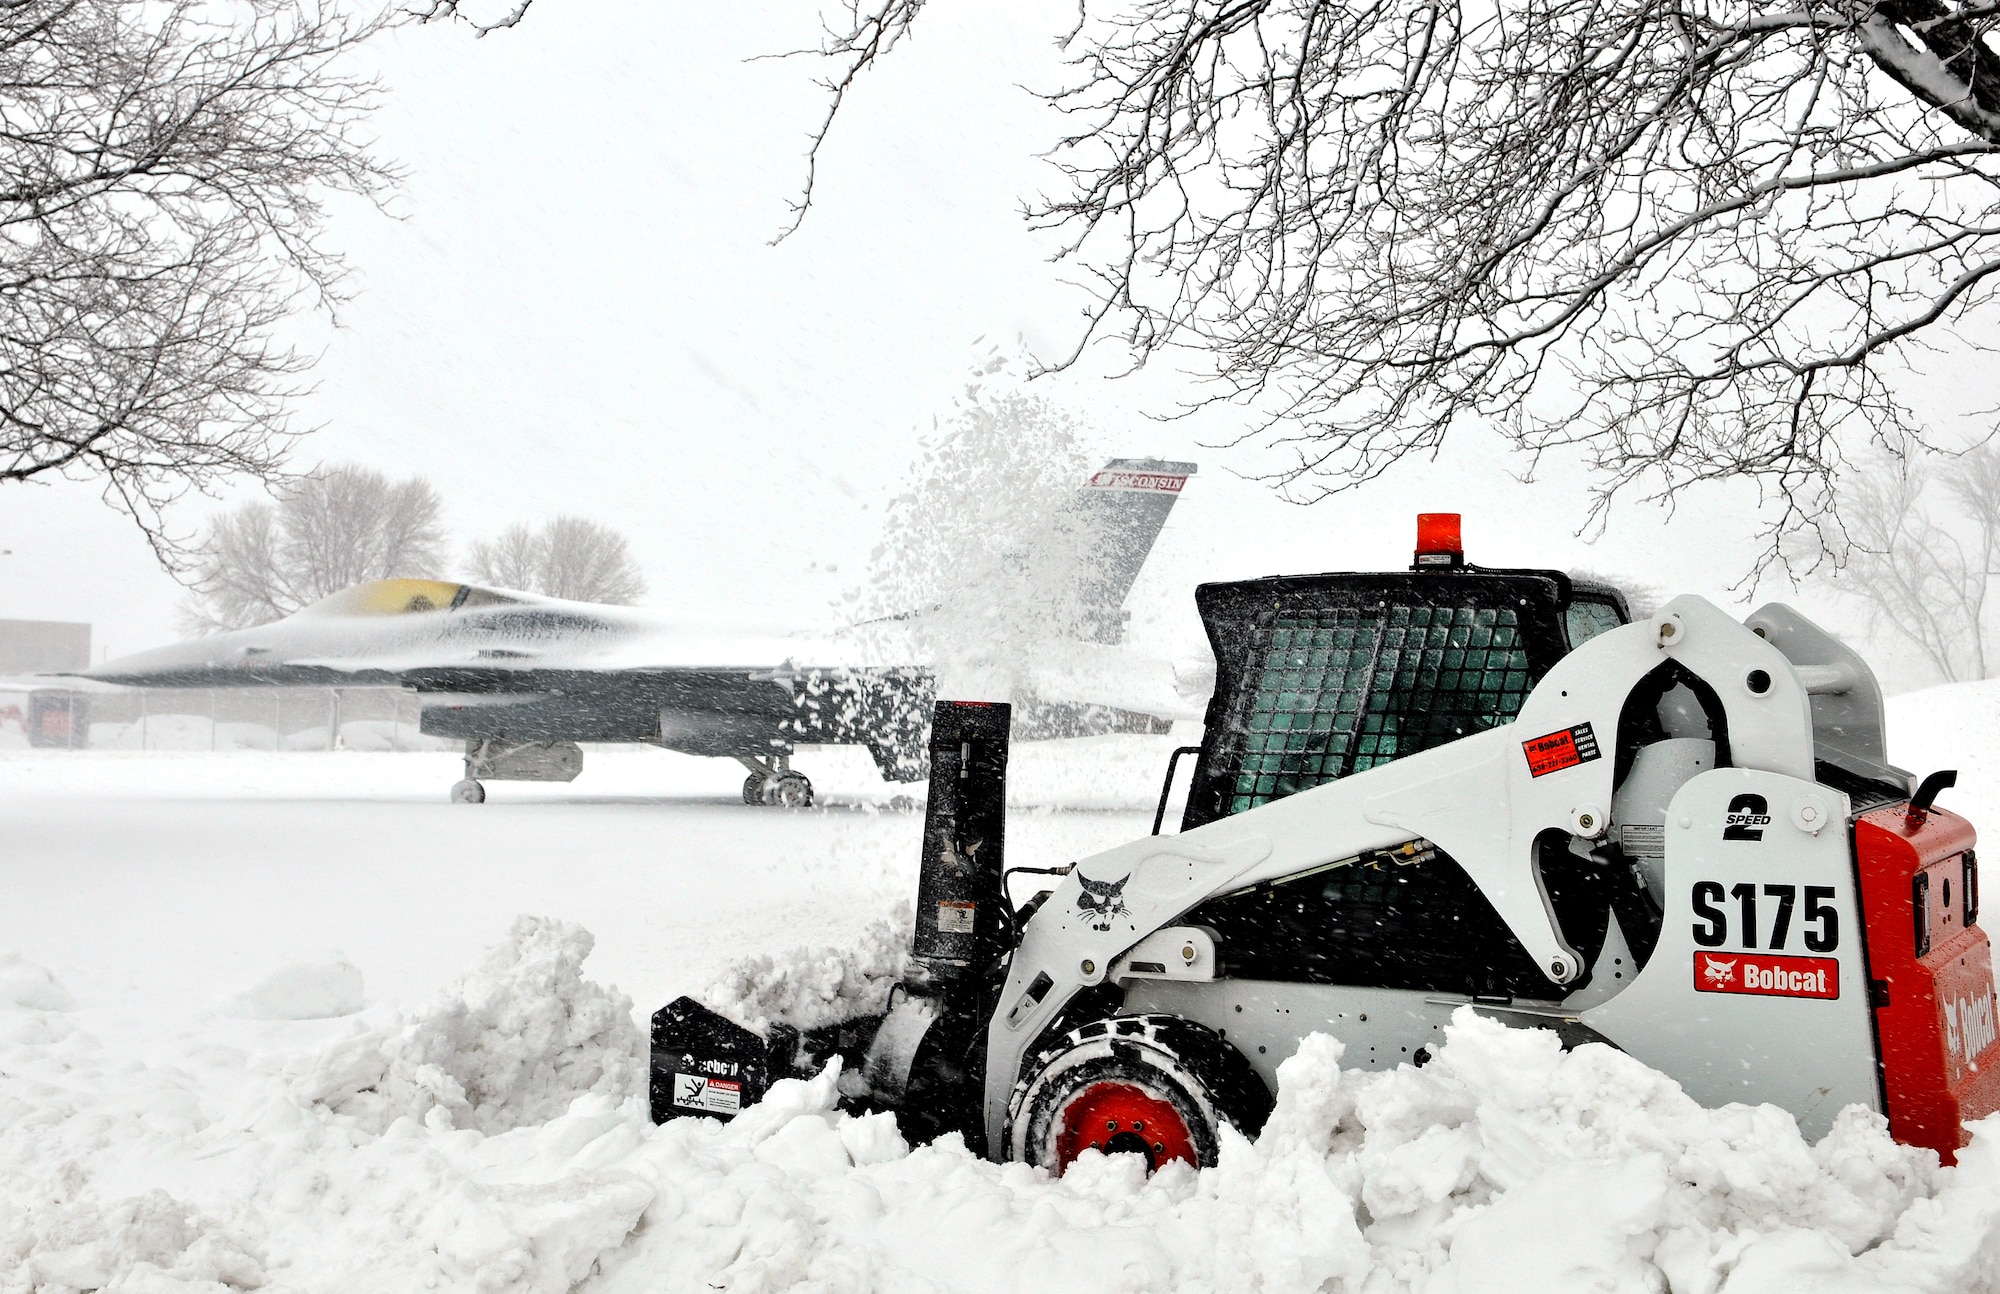 Chief Master Sgt. David Martin, 115th Civil Engineer Squadron, clears walking paths at Truax Field's 115th Fighter Wing as Winter Storm Draco continues to drop snow across the Northern Midwest Dec. 20. Although many local businesses and school are closed throughout the area, the 115th Fighter Wing remains open and ready for business. “The Wisconsin Air National Guard stands ready to execute our state mission, including domestic operations, by supporting relief efforts during natural disasters -- such as severe blizzards,” said 115th Fighter Wing Commander Col. Jeffrey Wiegand. “Our Airmen are ready, trained and equipped to respond on a moment’s notice.” Wisconsin Air National Guard photo by Tech. Sgt. Jon LaDue